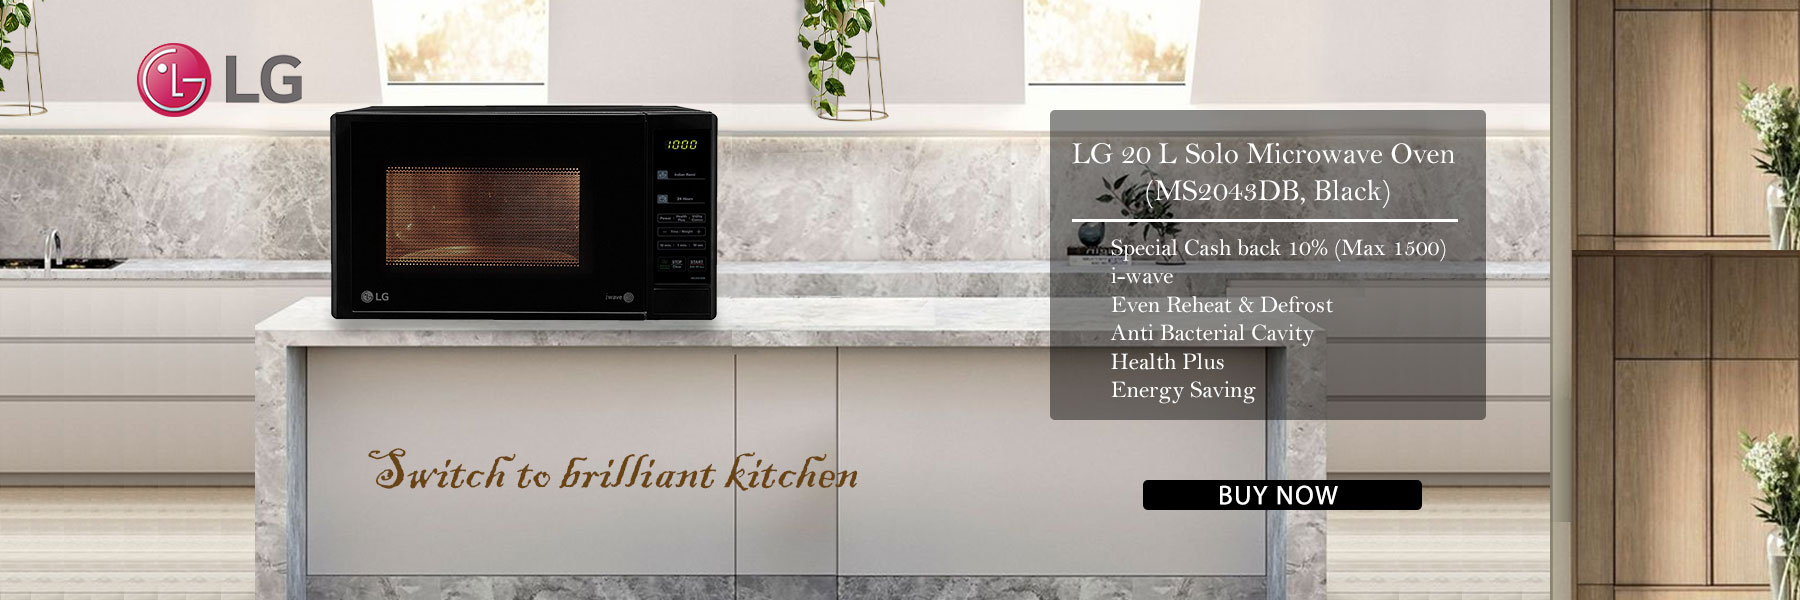 LG 20 L Solo Microwave Oven (MS2043DB, Black)